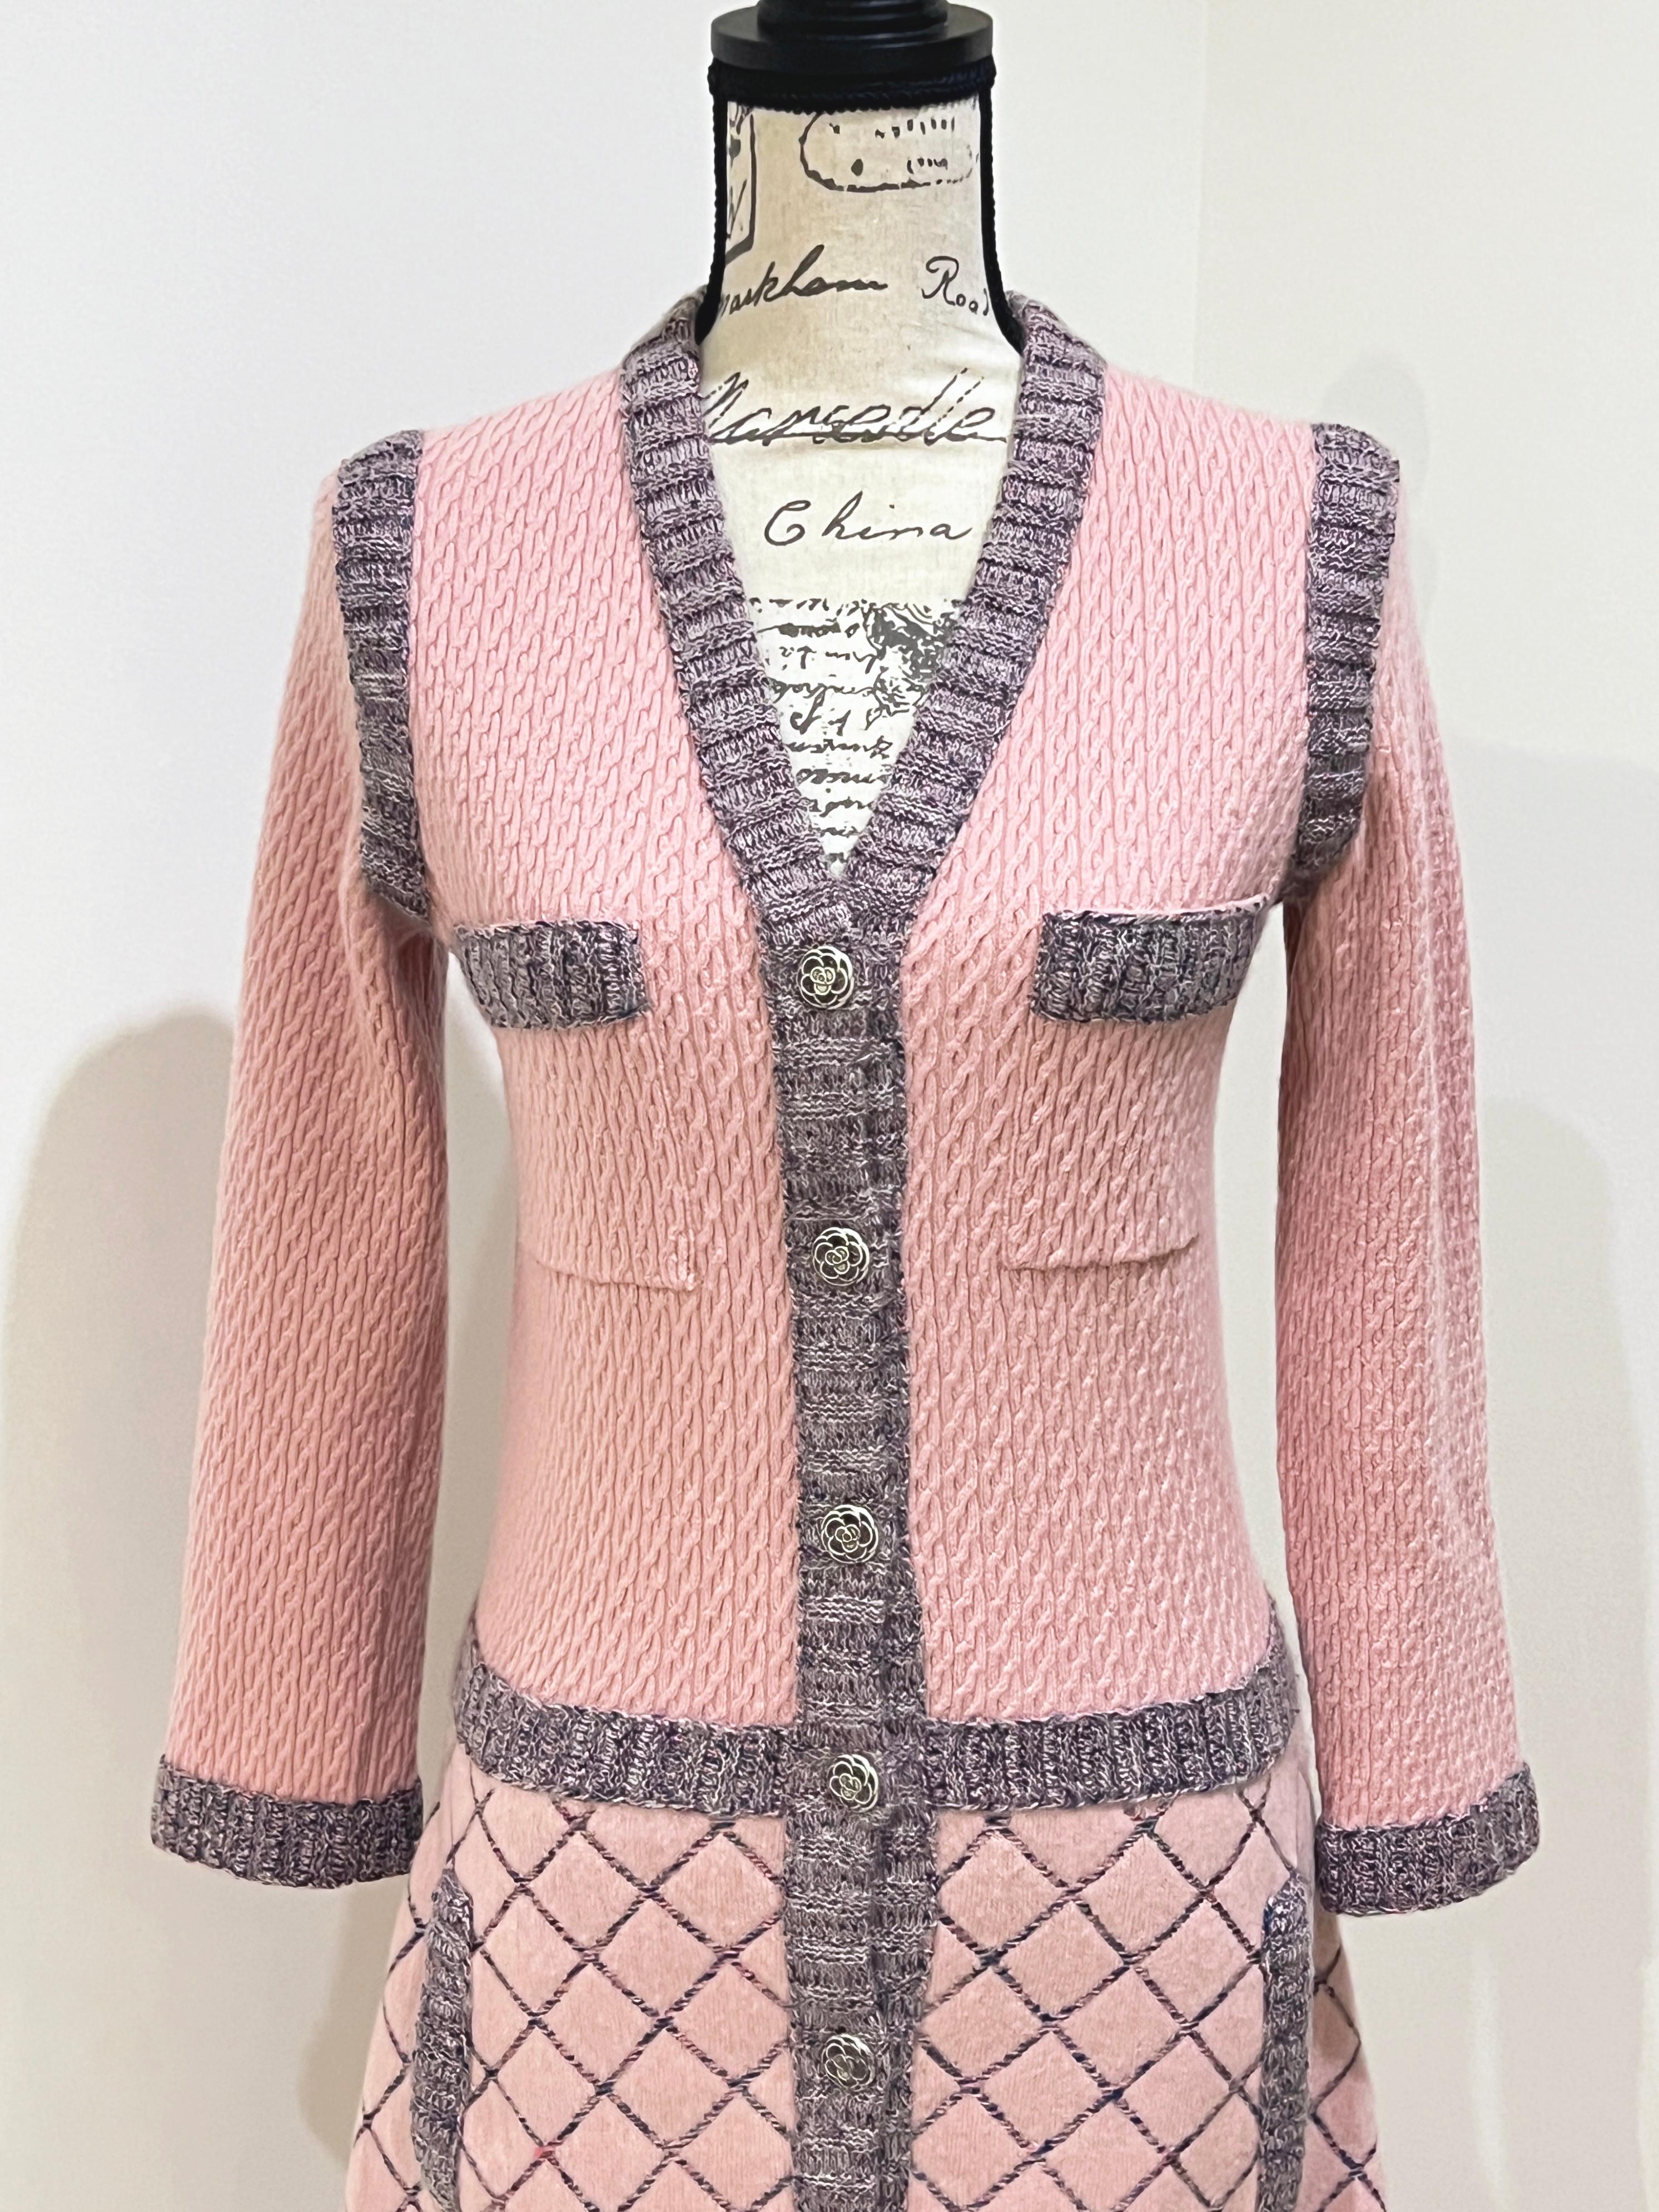 Chanel Iconic Coco Brasserie Quilted Jacket Dress For Sale 12